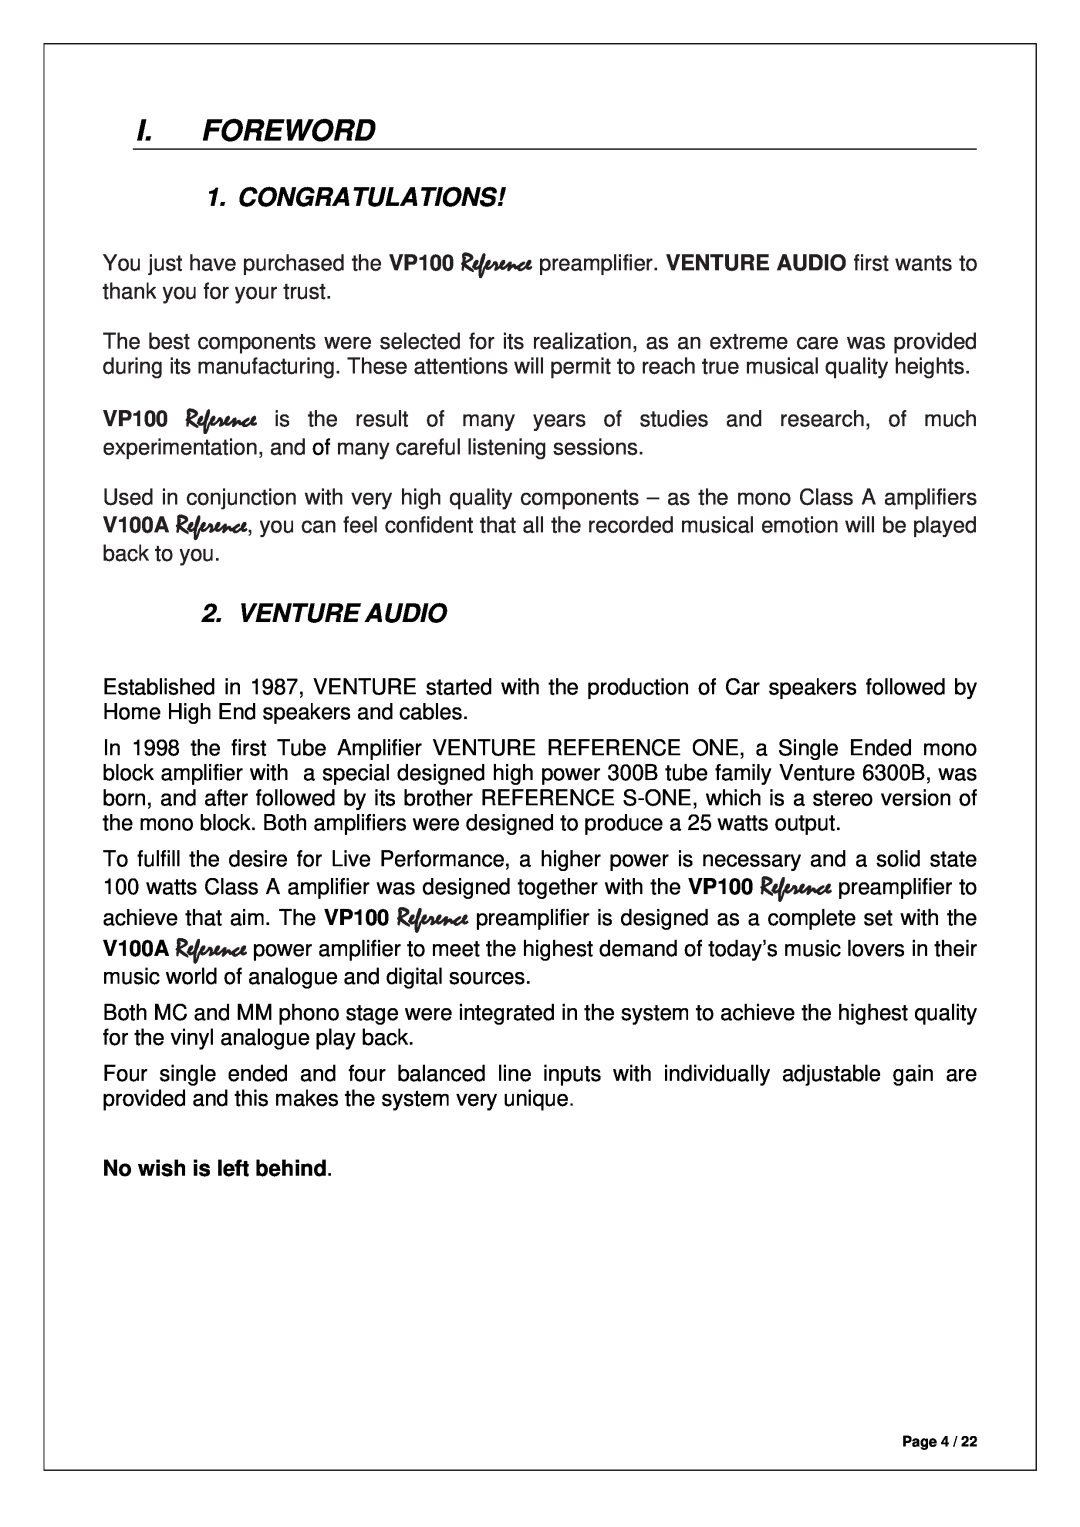 Venture Products VP100 manual I.Foreword, Congratulations, Venture Audio, No wish is left behind 